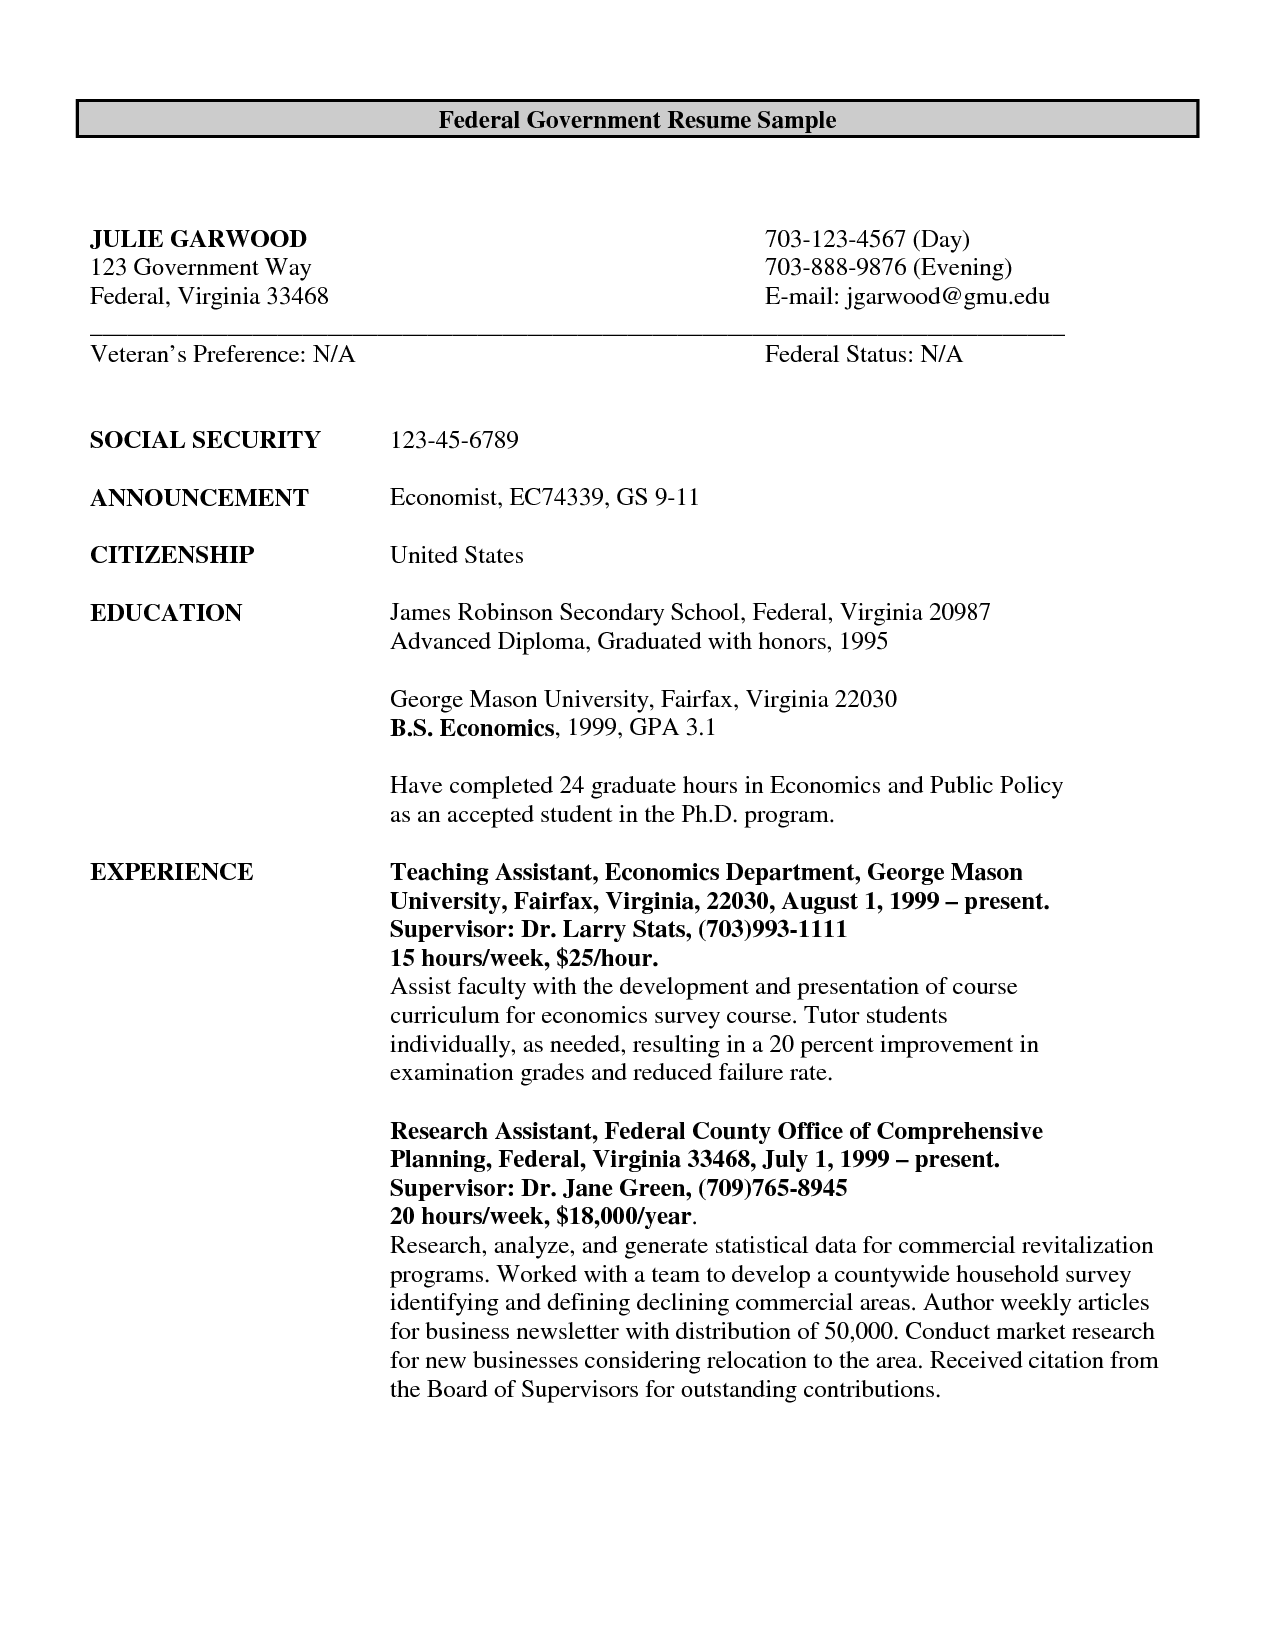 Federal Government Resume ExampleCareer Resume Template